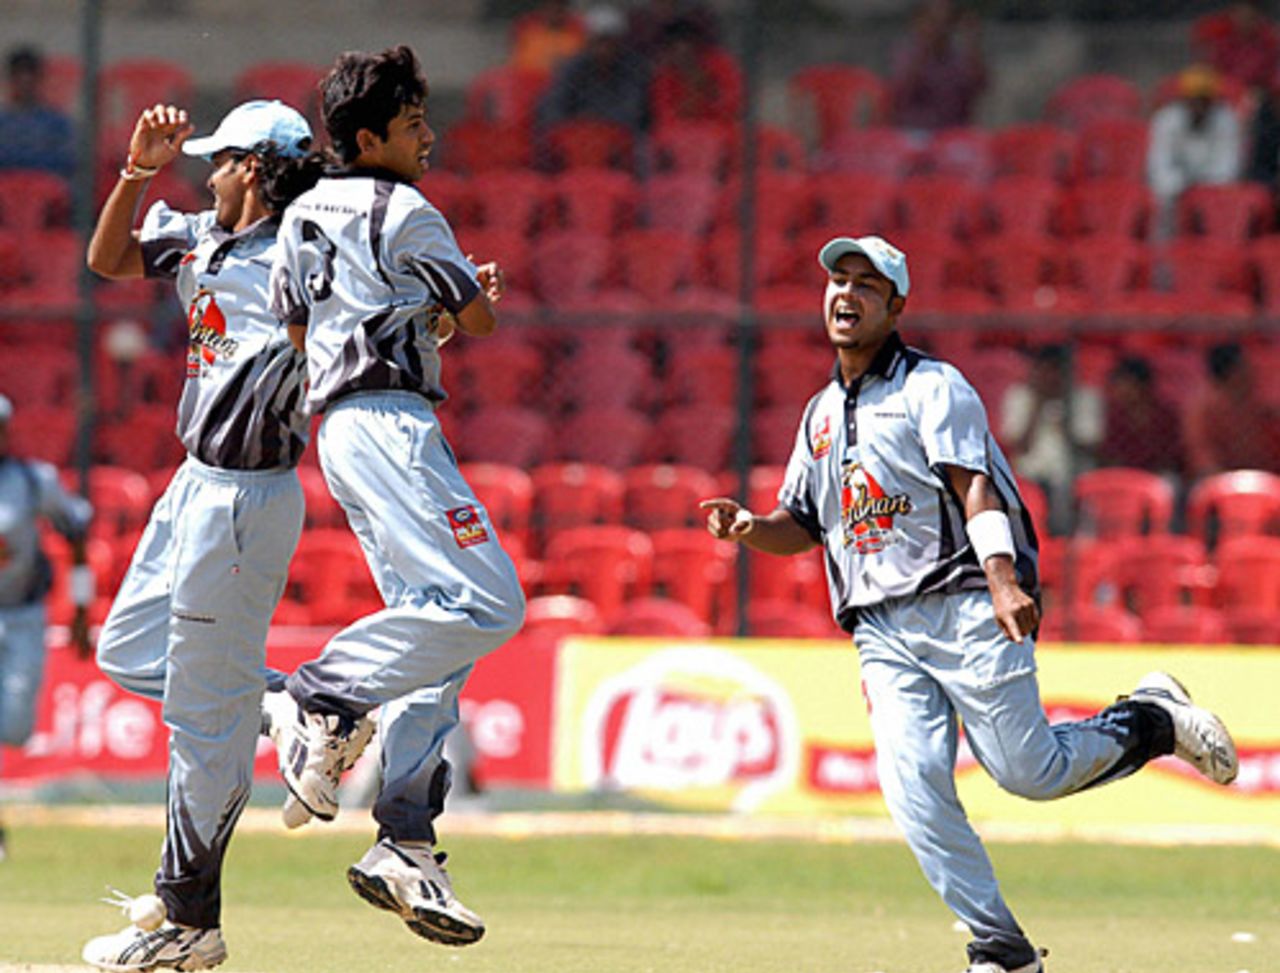 Cricketers from the Karnataka State Cricket Association XI celebrate their victory over the Bradman World XI, Bangalore, August 20, 2005